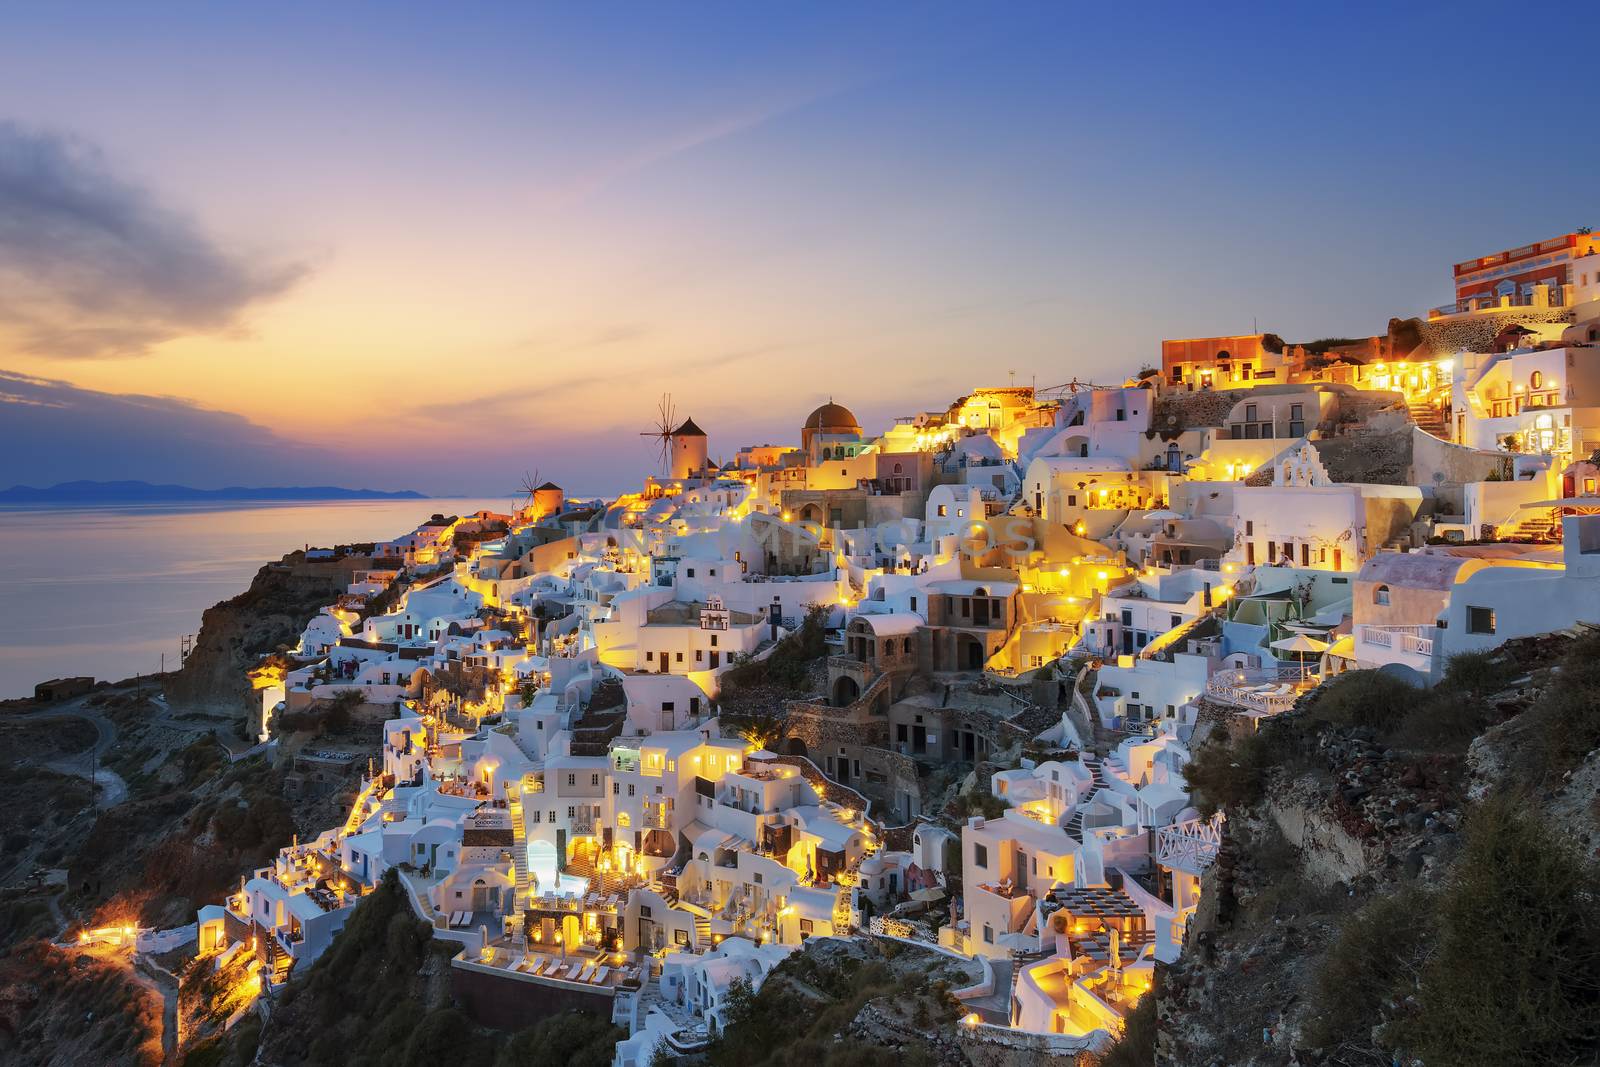 View of Oia at sunset, Santorini